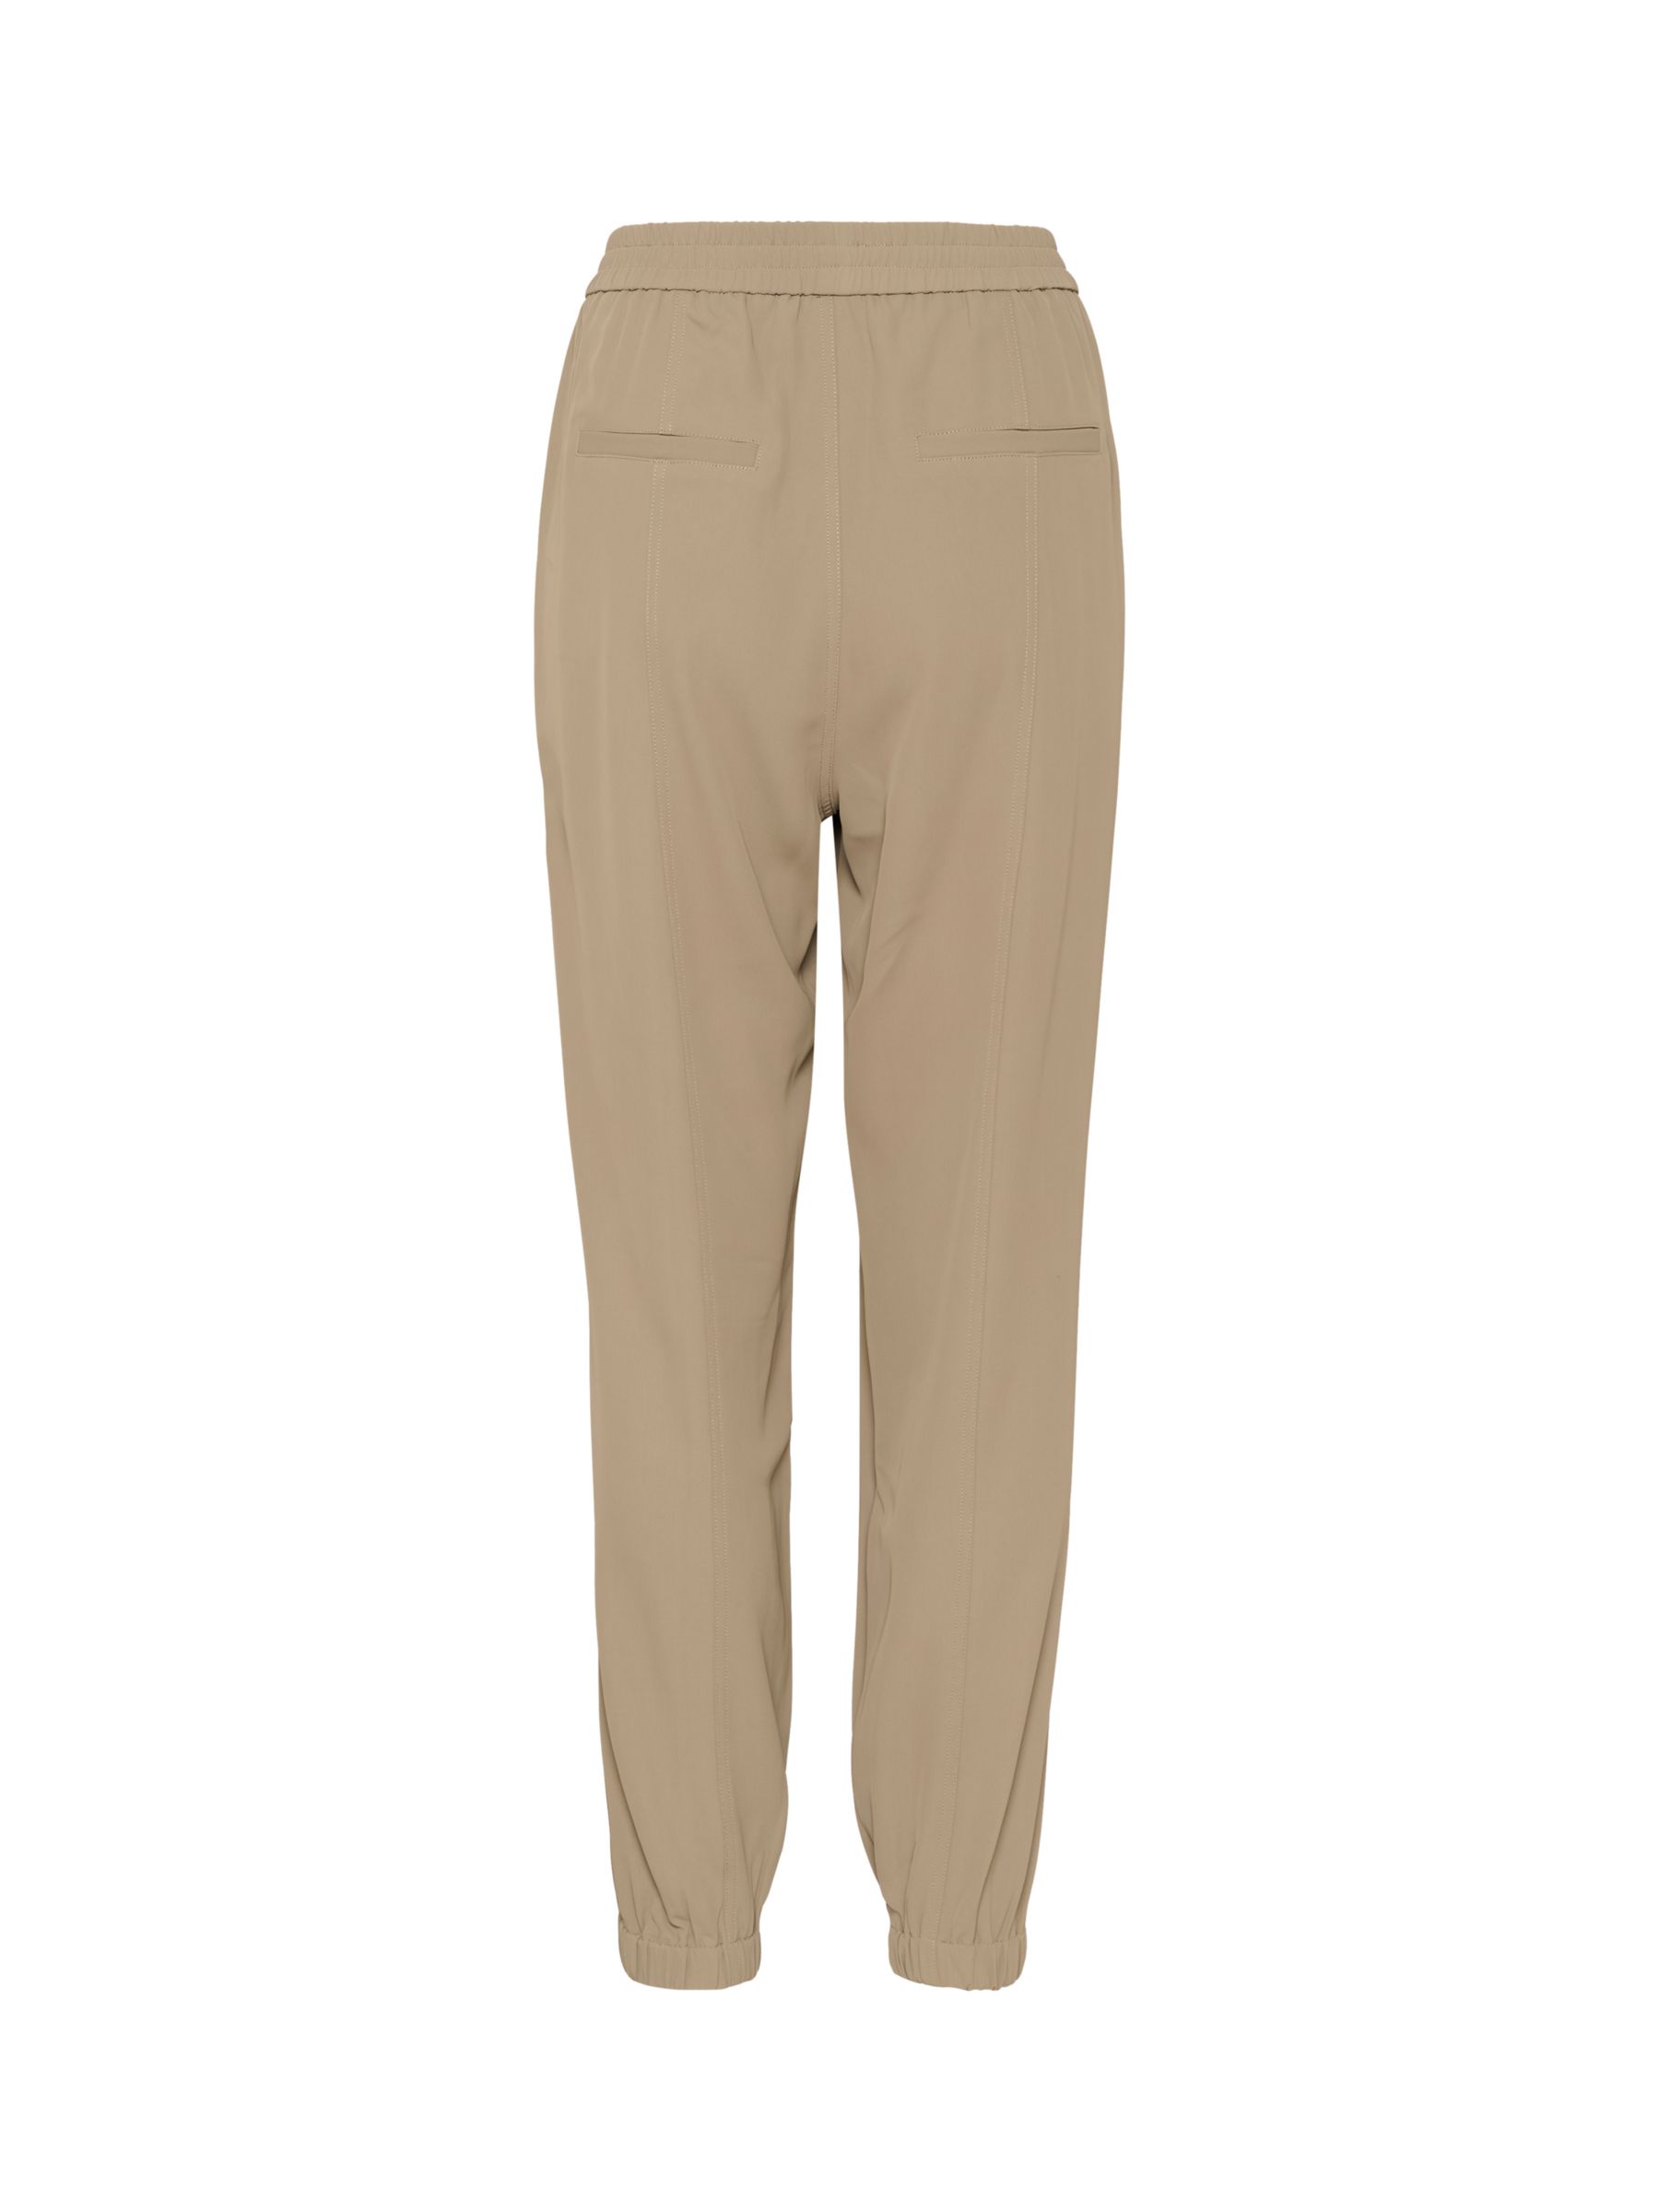 Buy KAFFE Signa Cargo Trousers Online at johnlewis.com